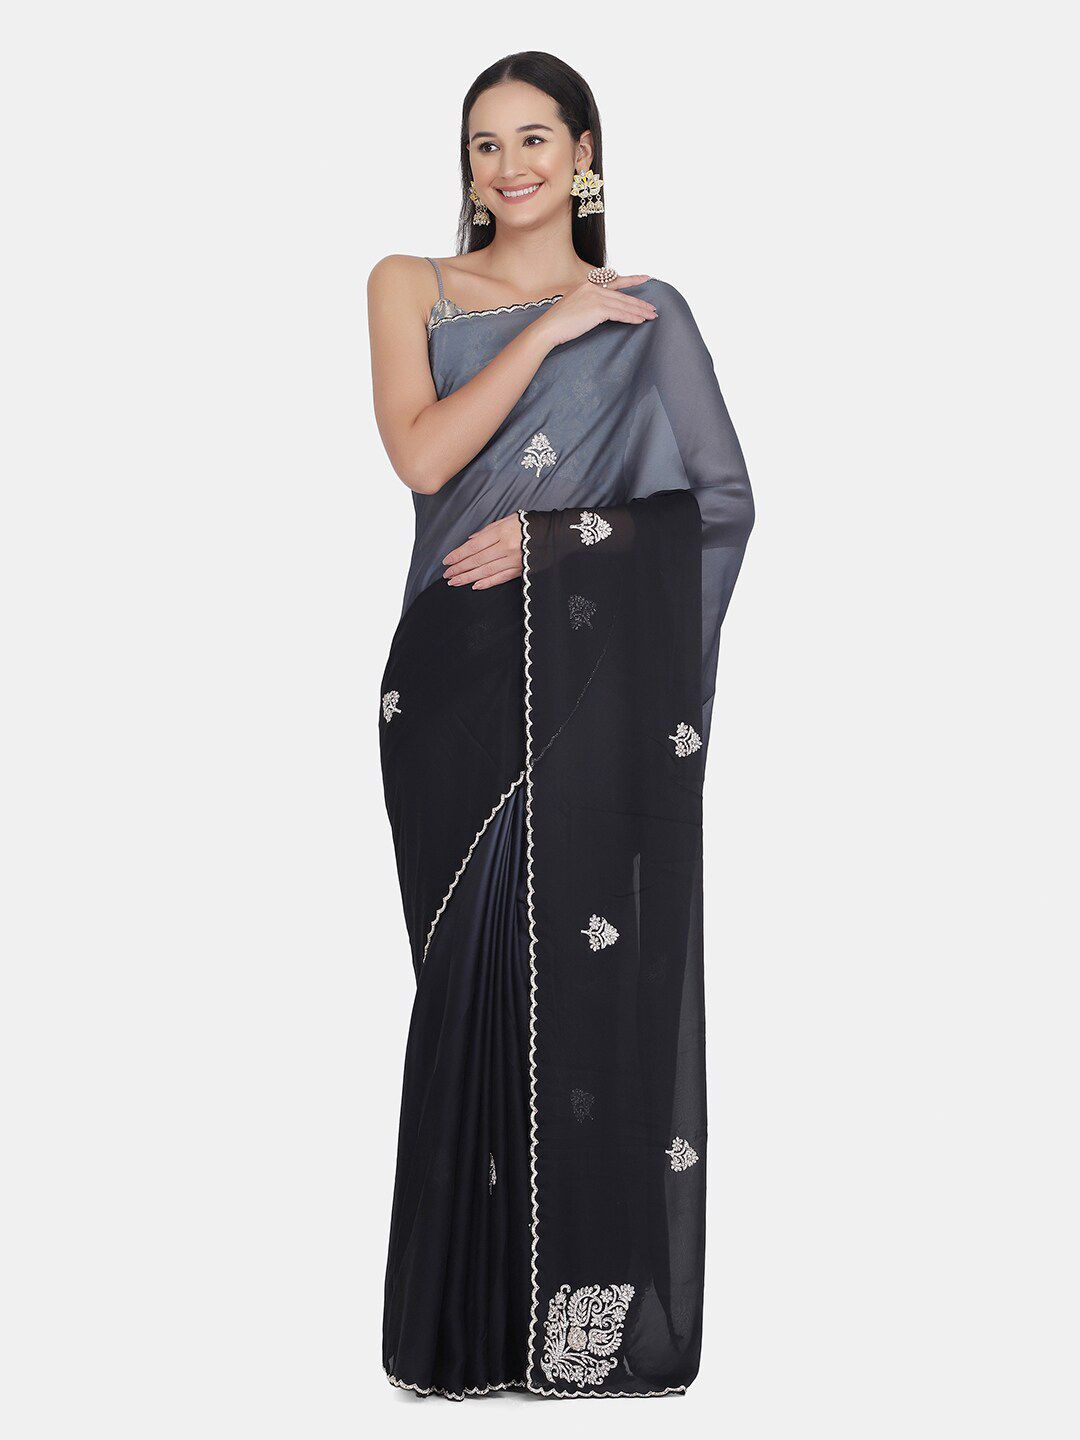 BOMBAY SELECTIONS Black & Silver-Toned Floral Art Silk Saree Price in India